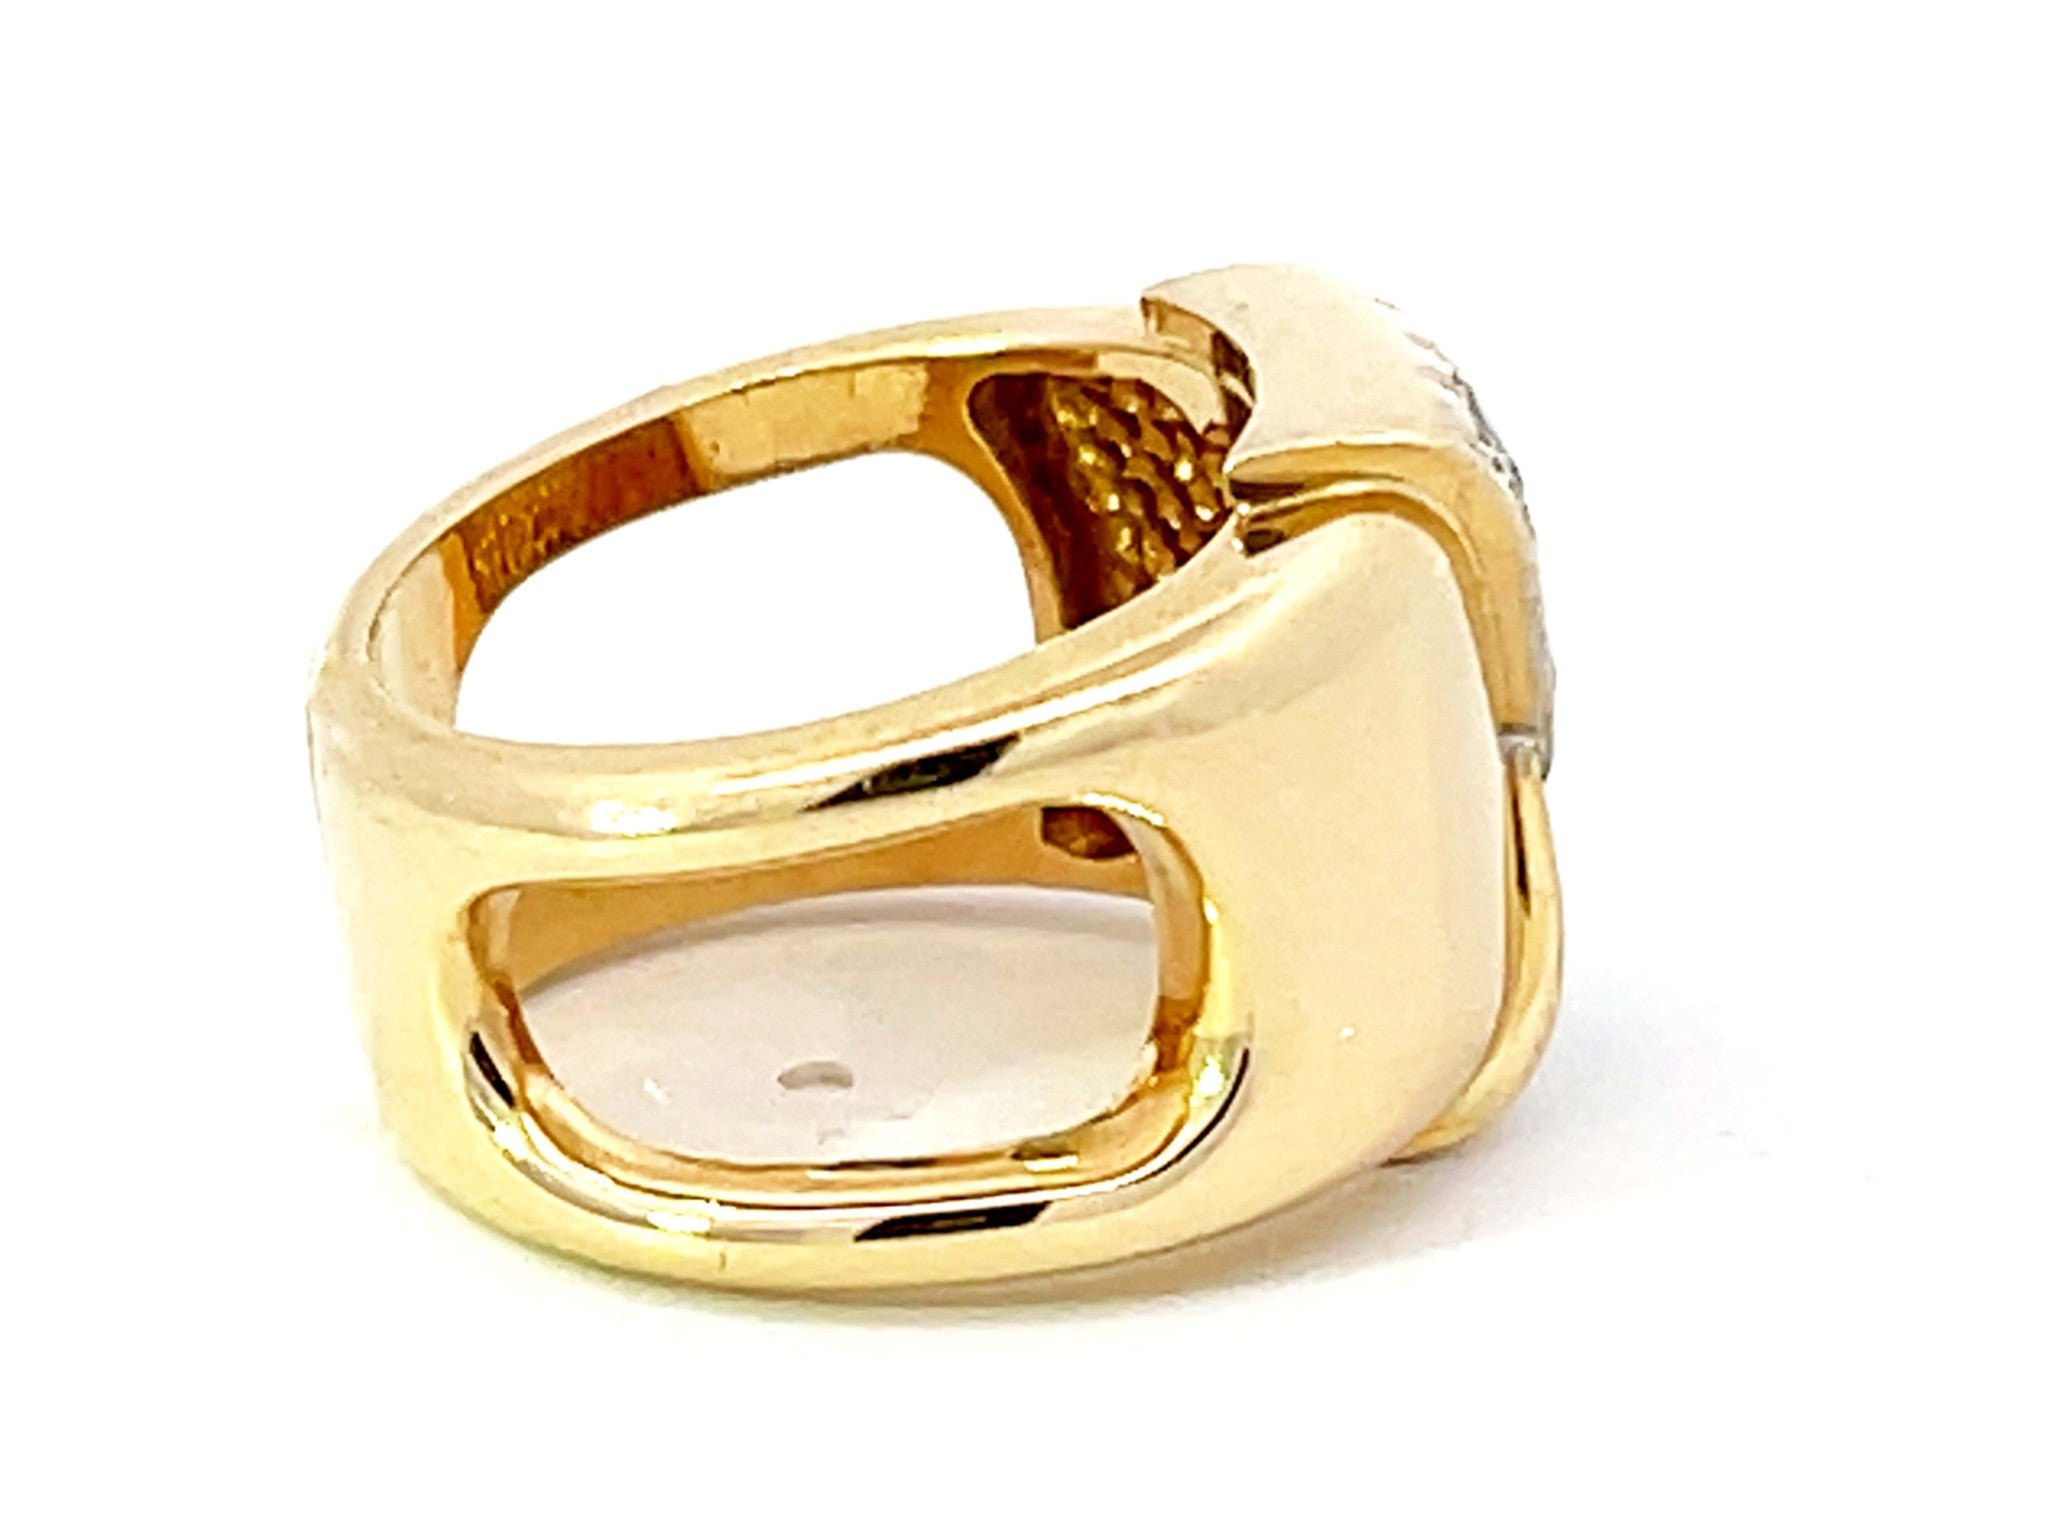 Wide Band Diamond Ring with Cutout Shoulders in 18k Yellow Gold